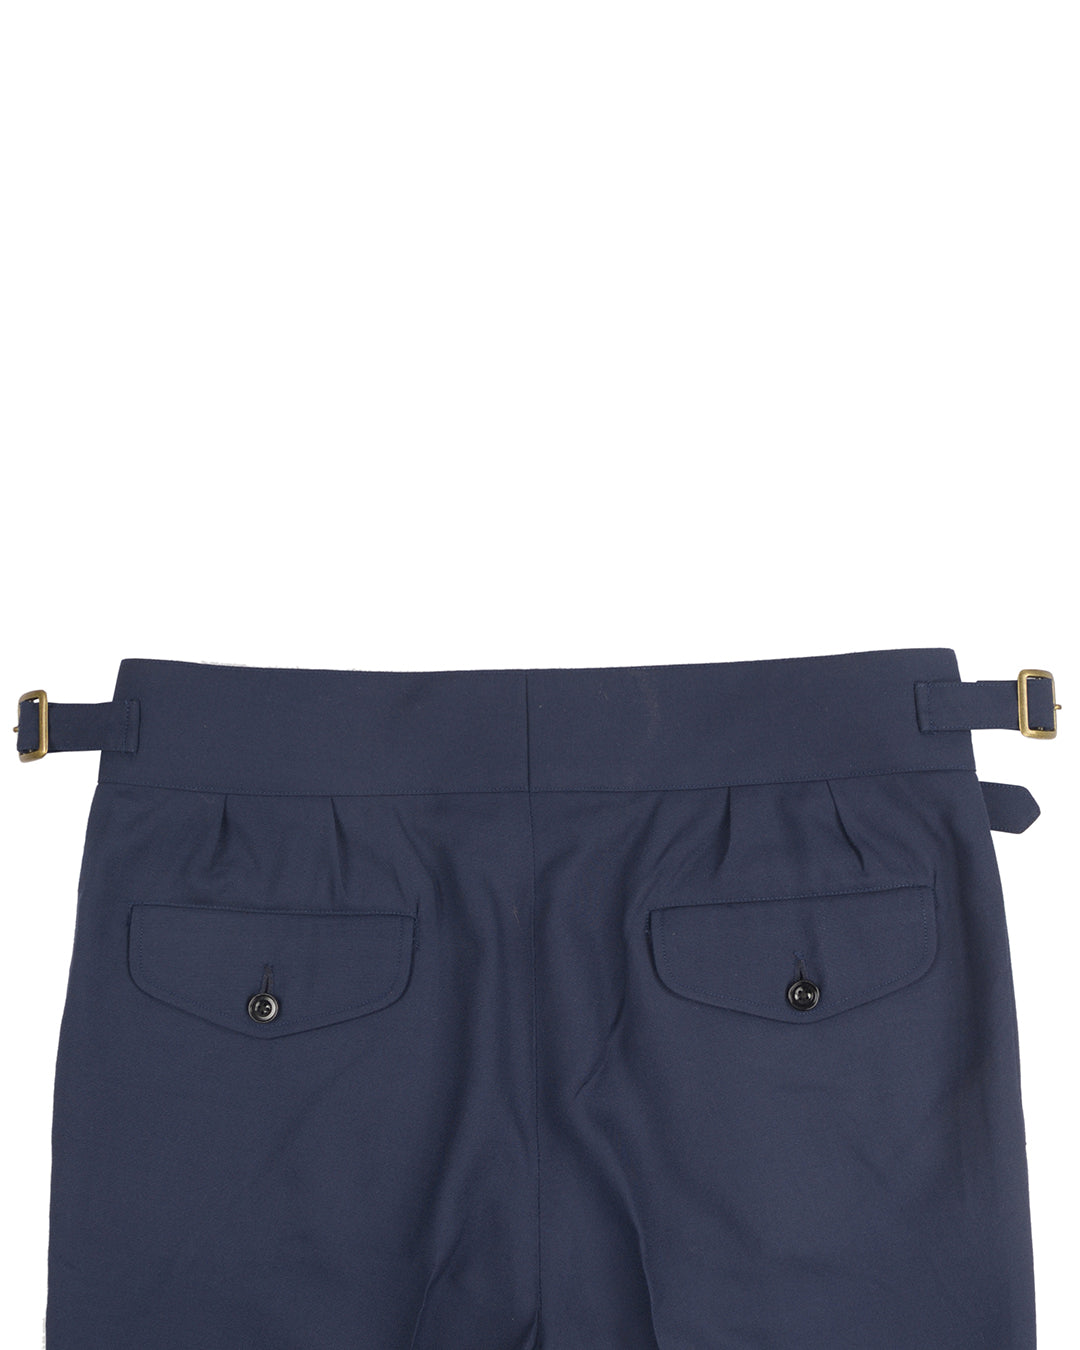 Holland & Sherry Crispaire Navy Solid